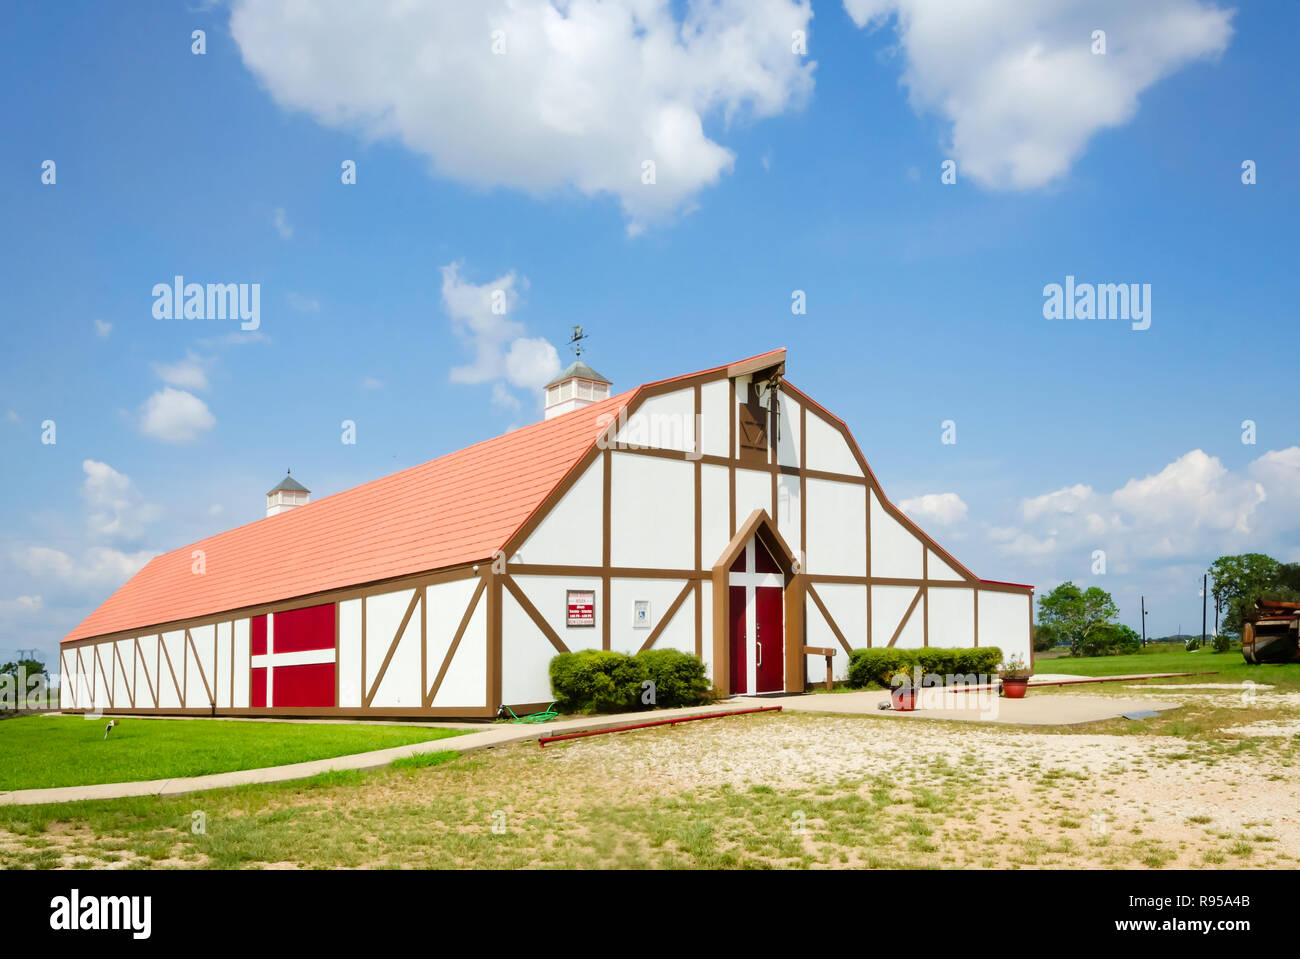 The Danish Heritage Museum is pictured, Sept. 3, 2017, in Danevang, Texas. Stock Photo